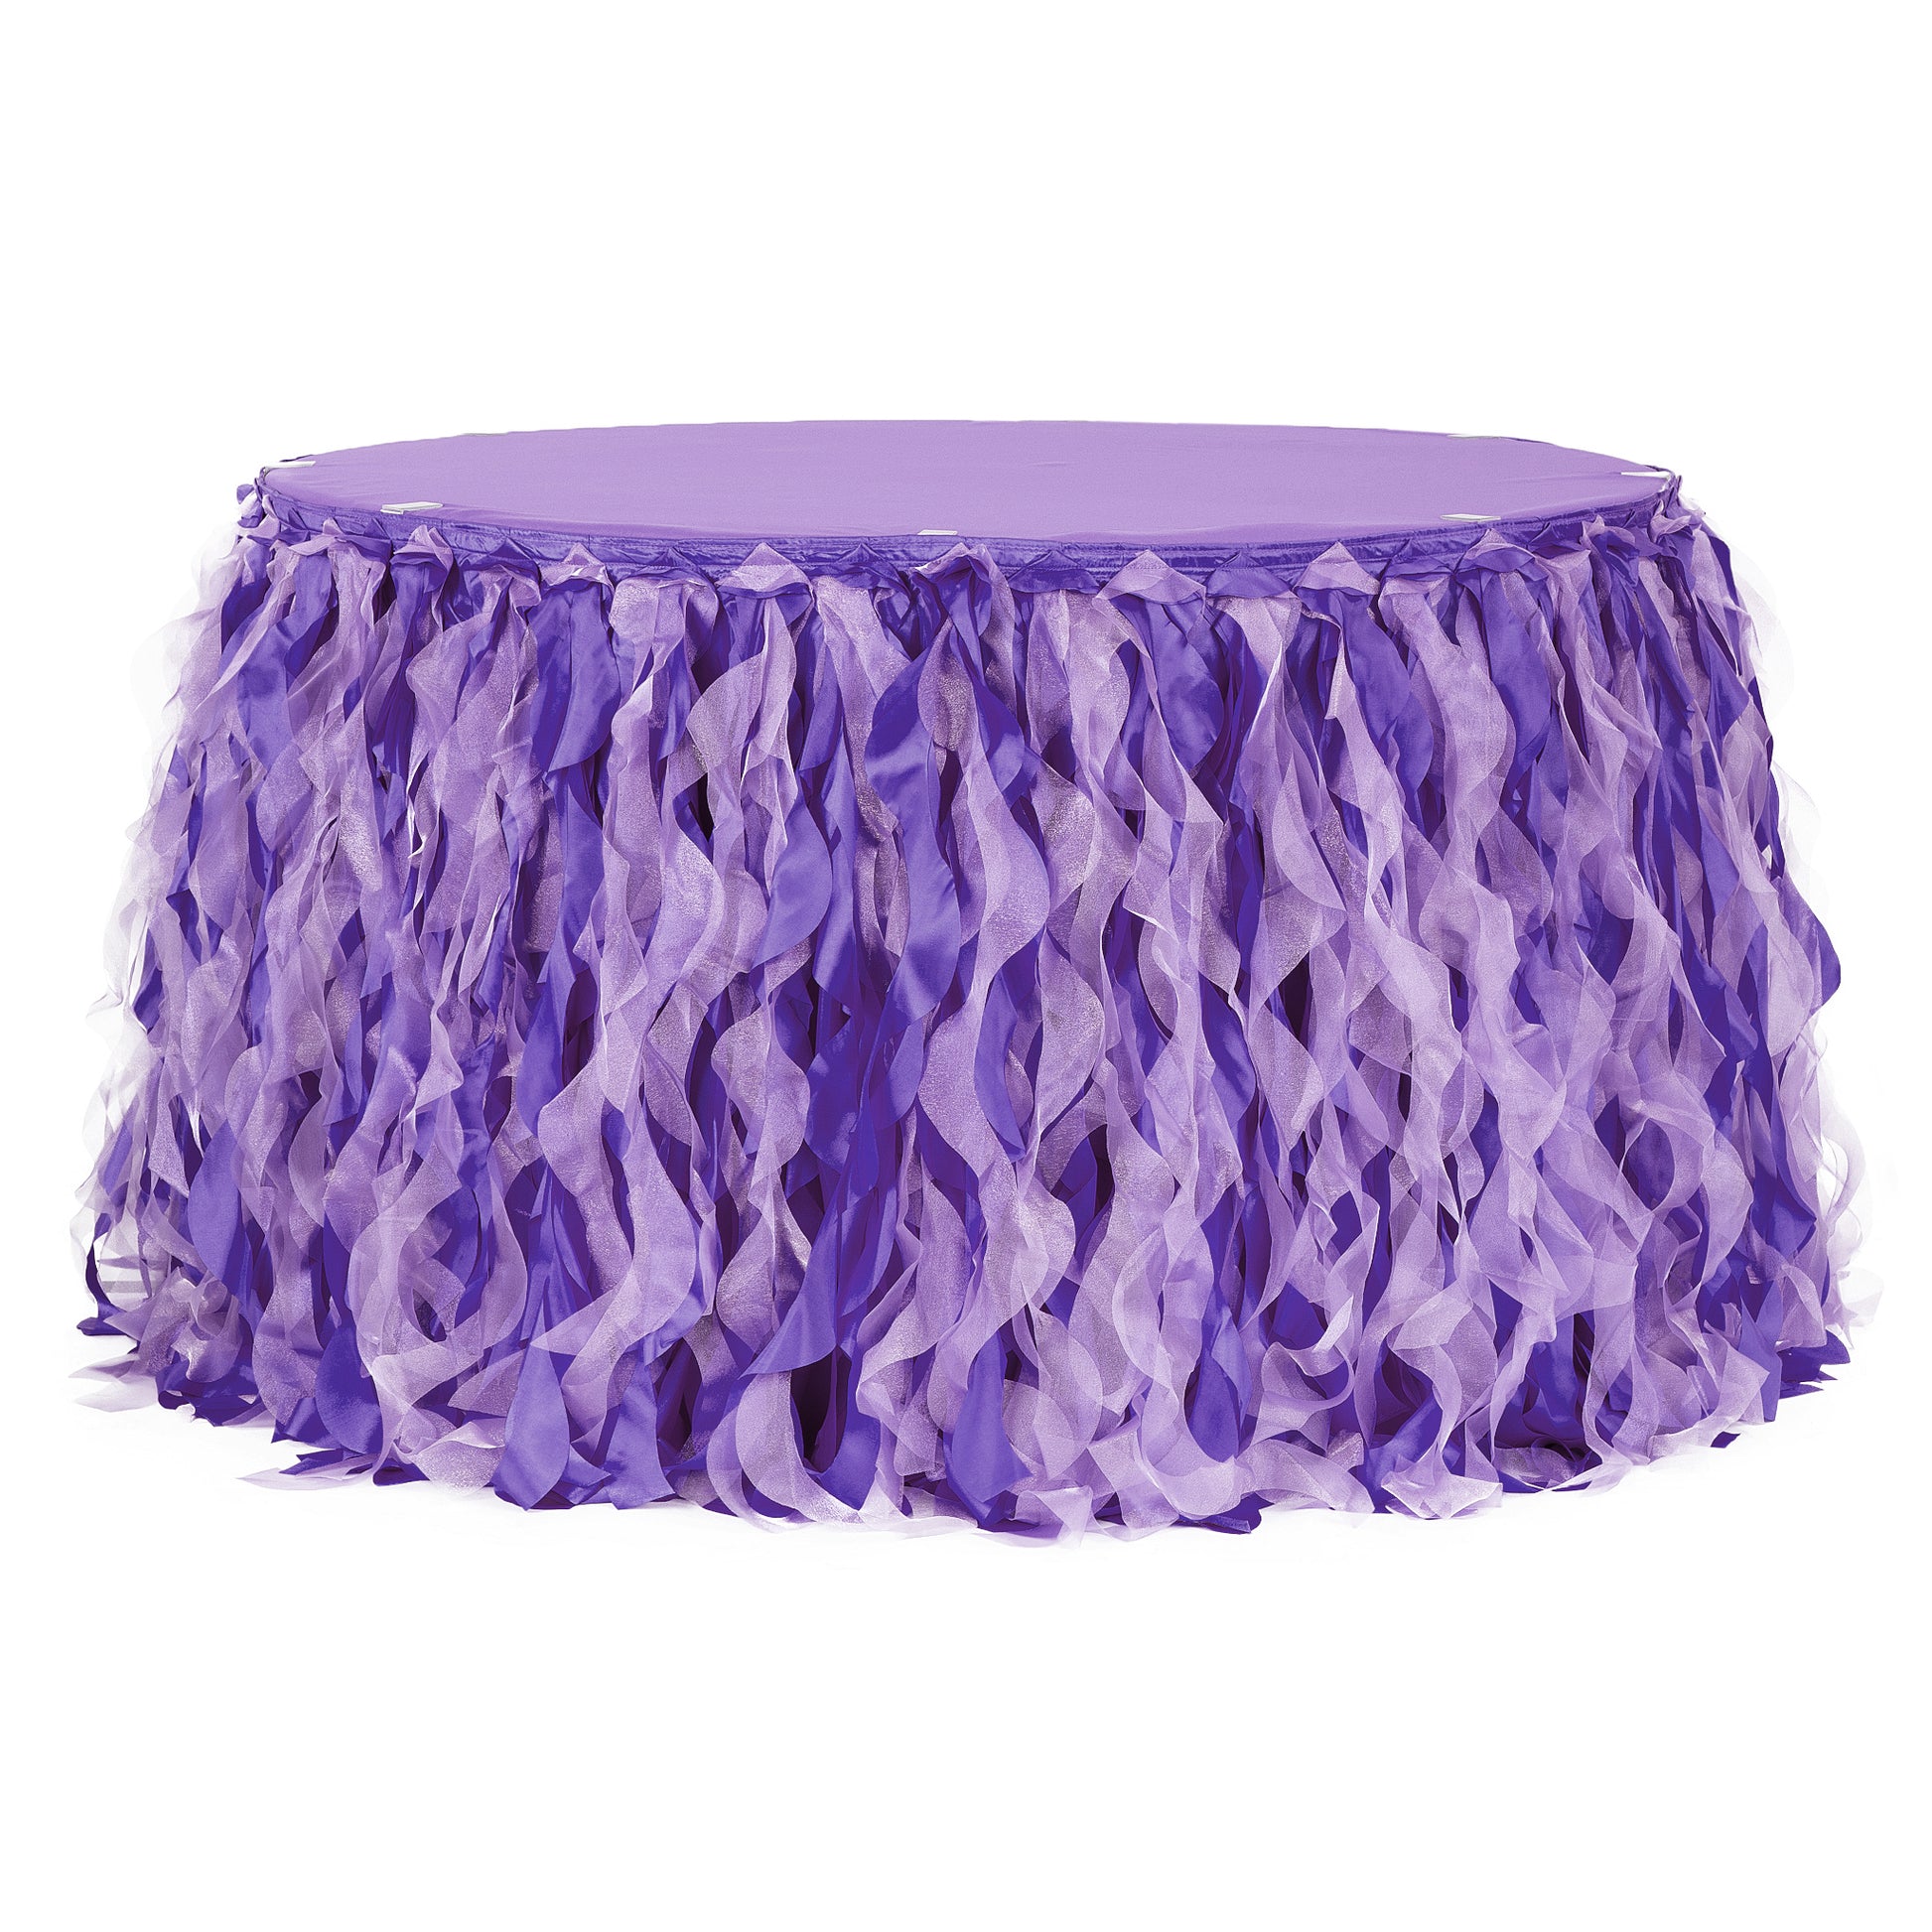 Curly Willow 14ft Table Skirt - Purple - CV Linens